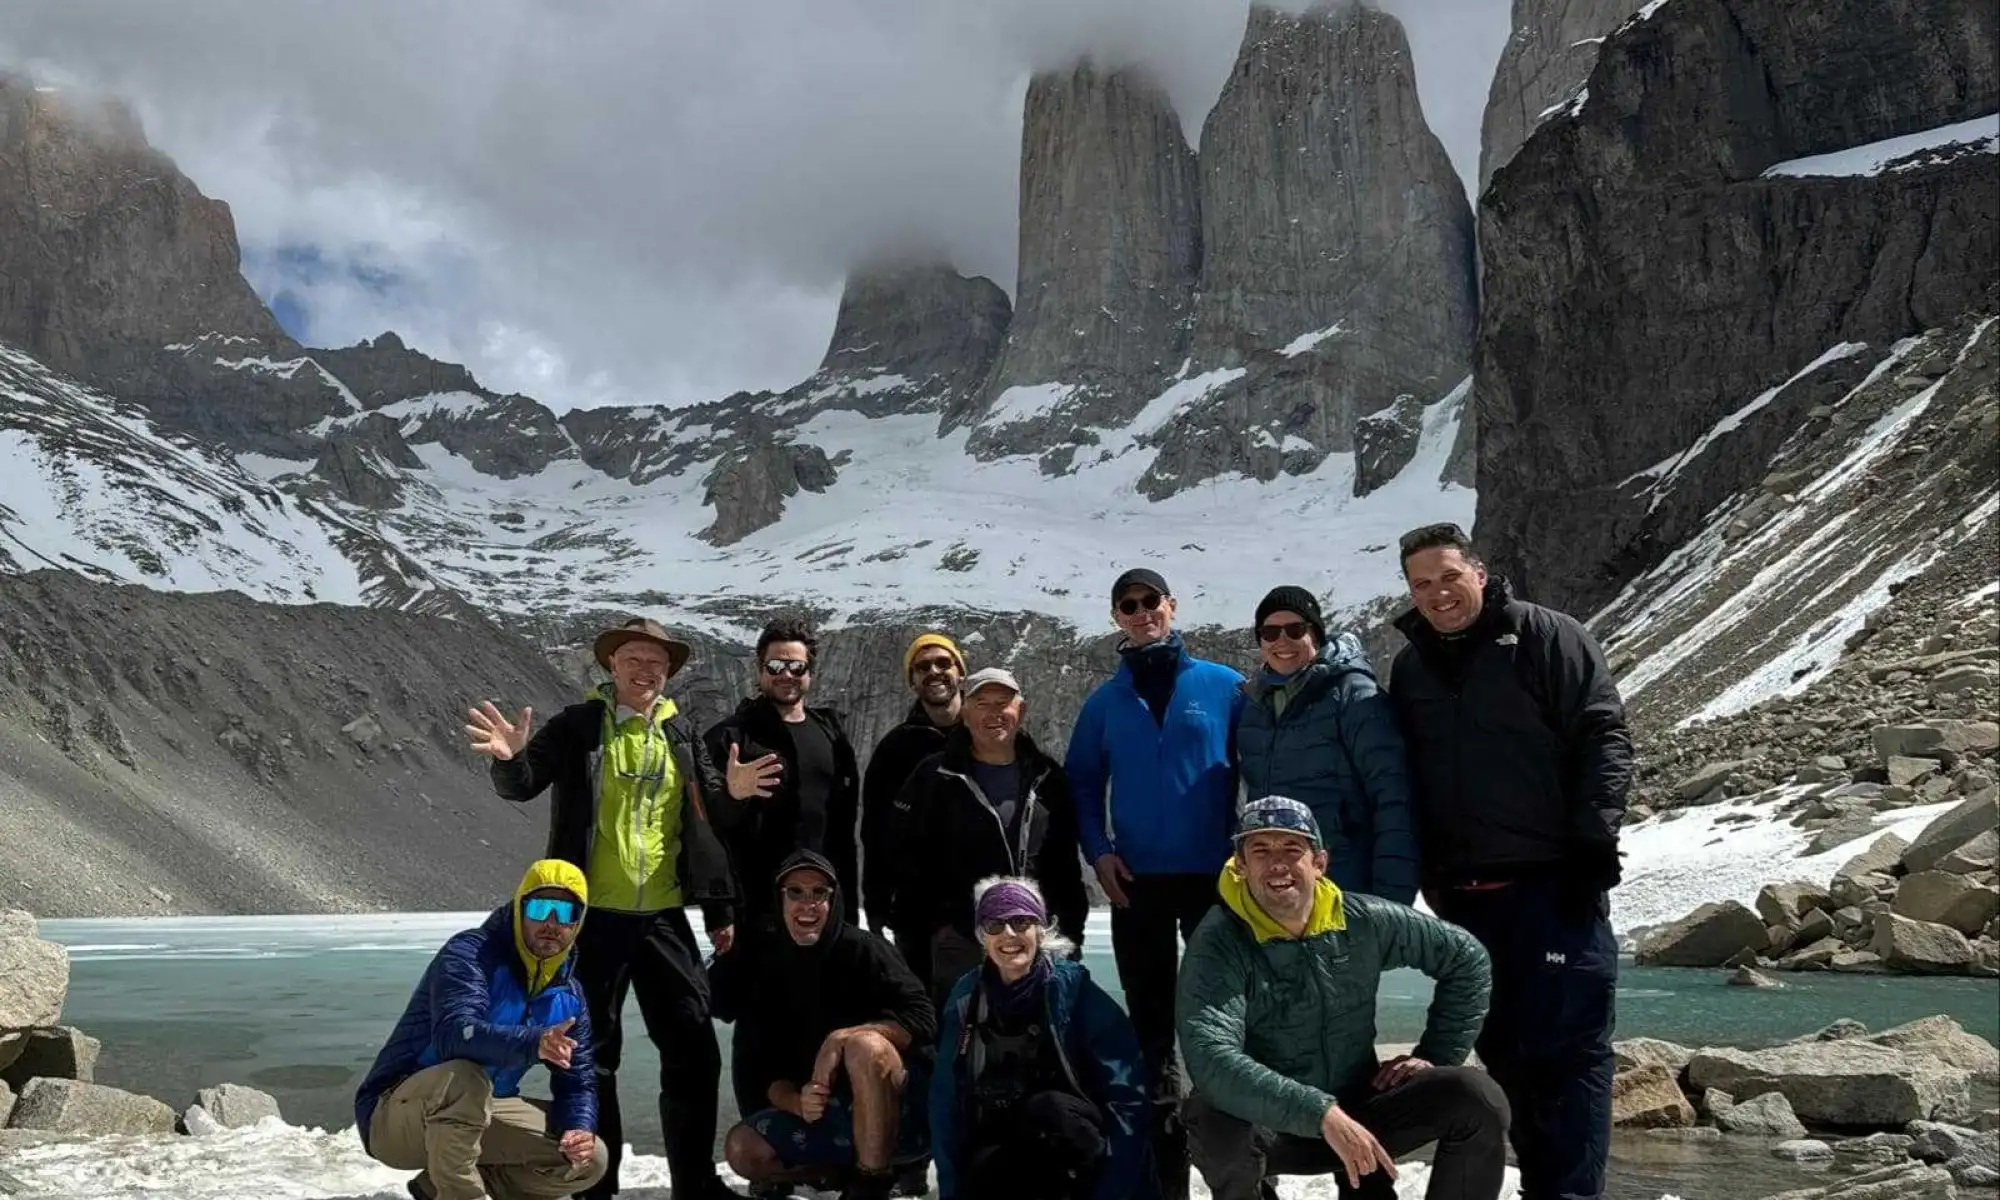 Guided by Nature Guides Torres del Paine Patagonia